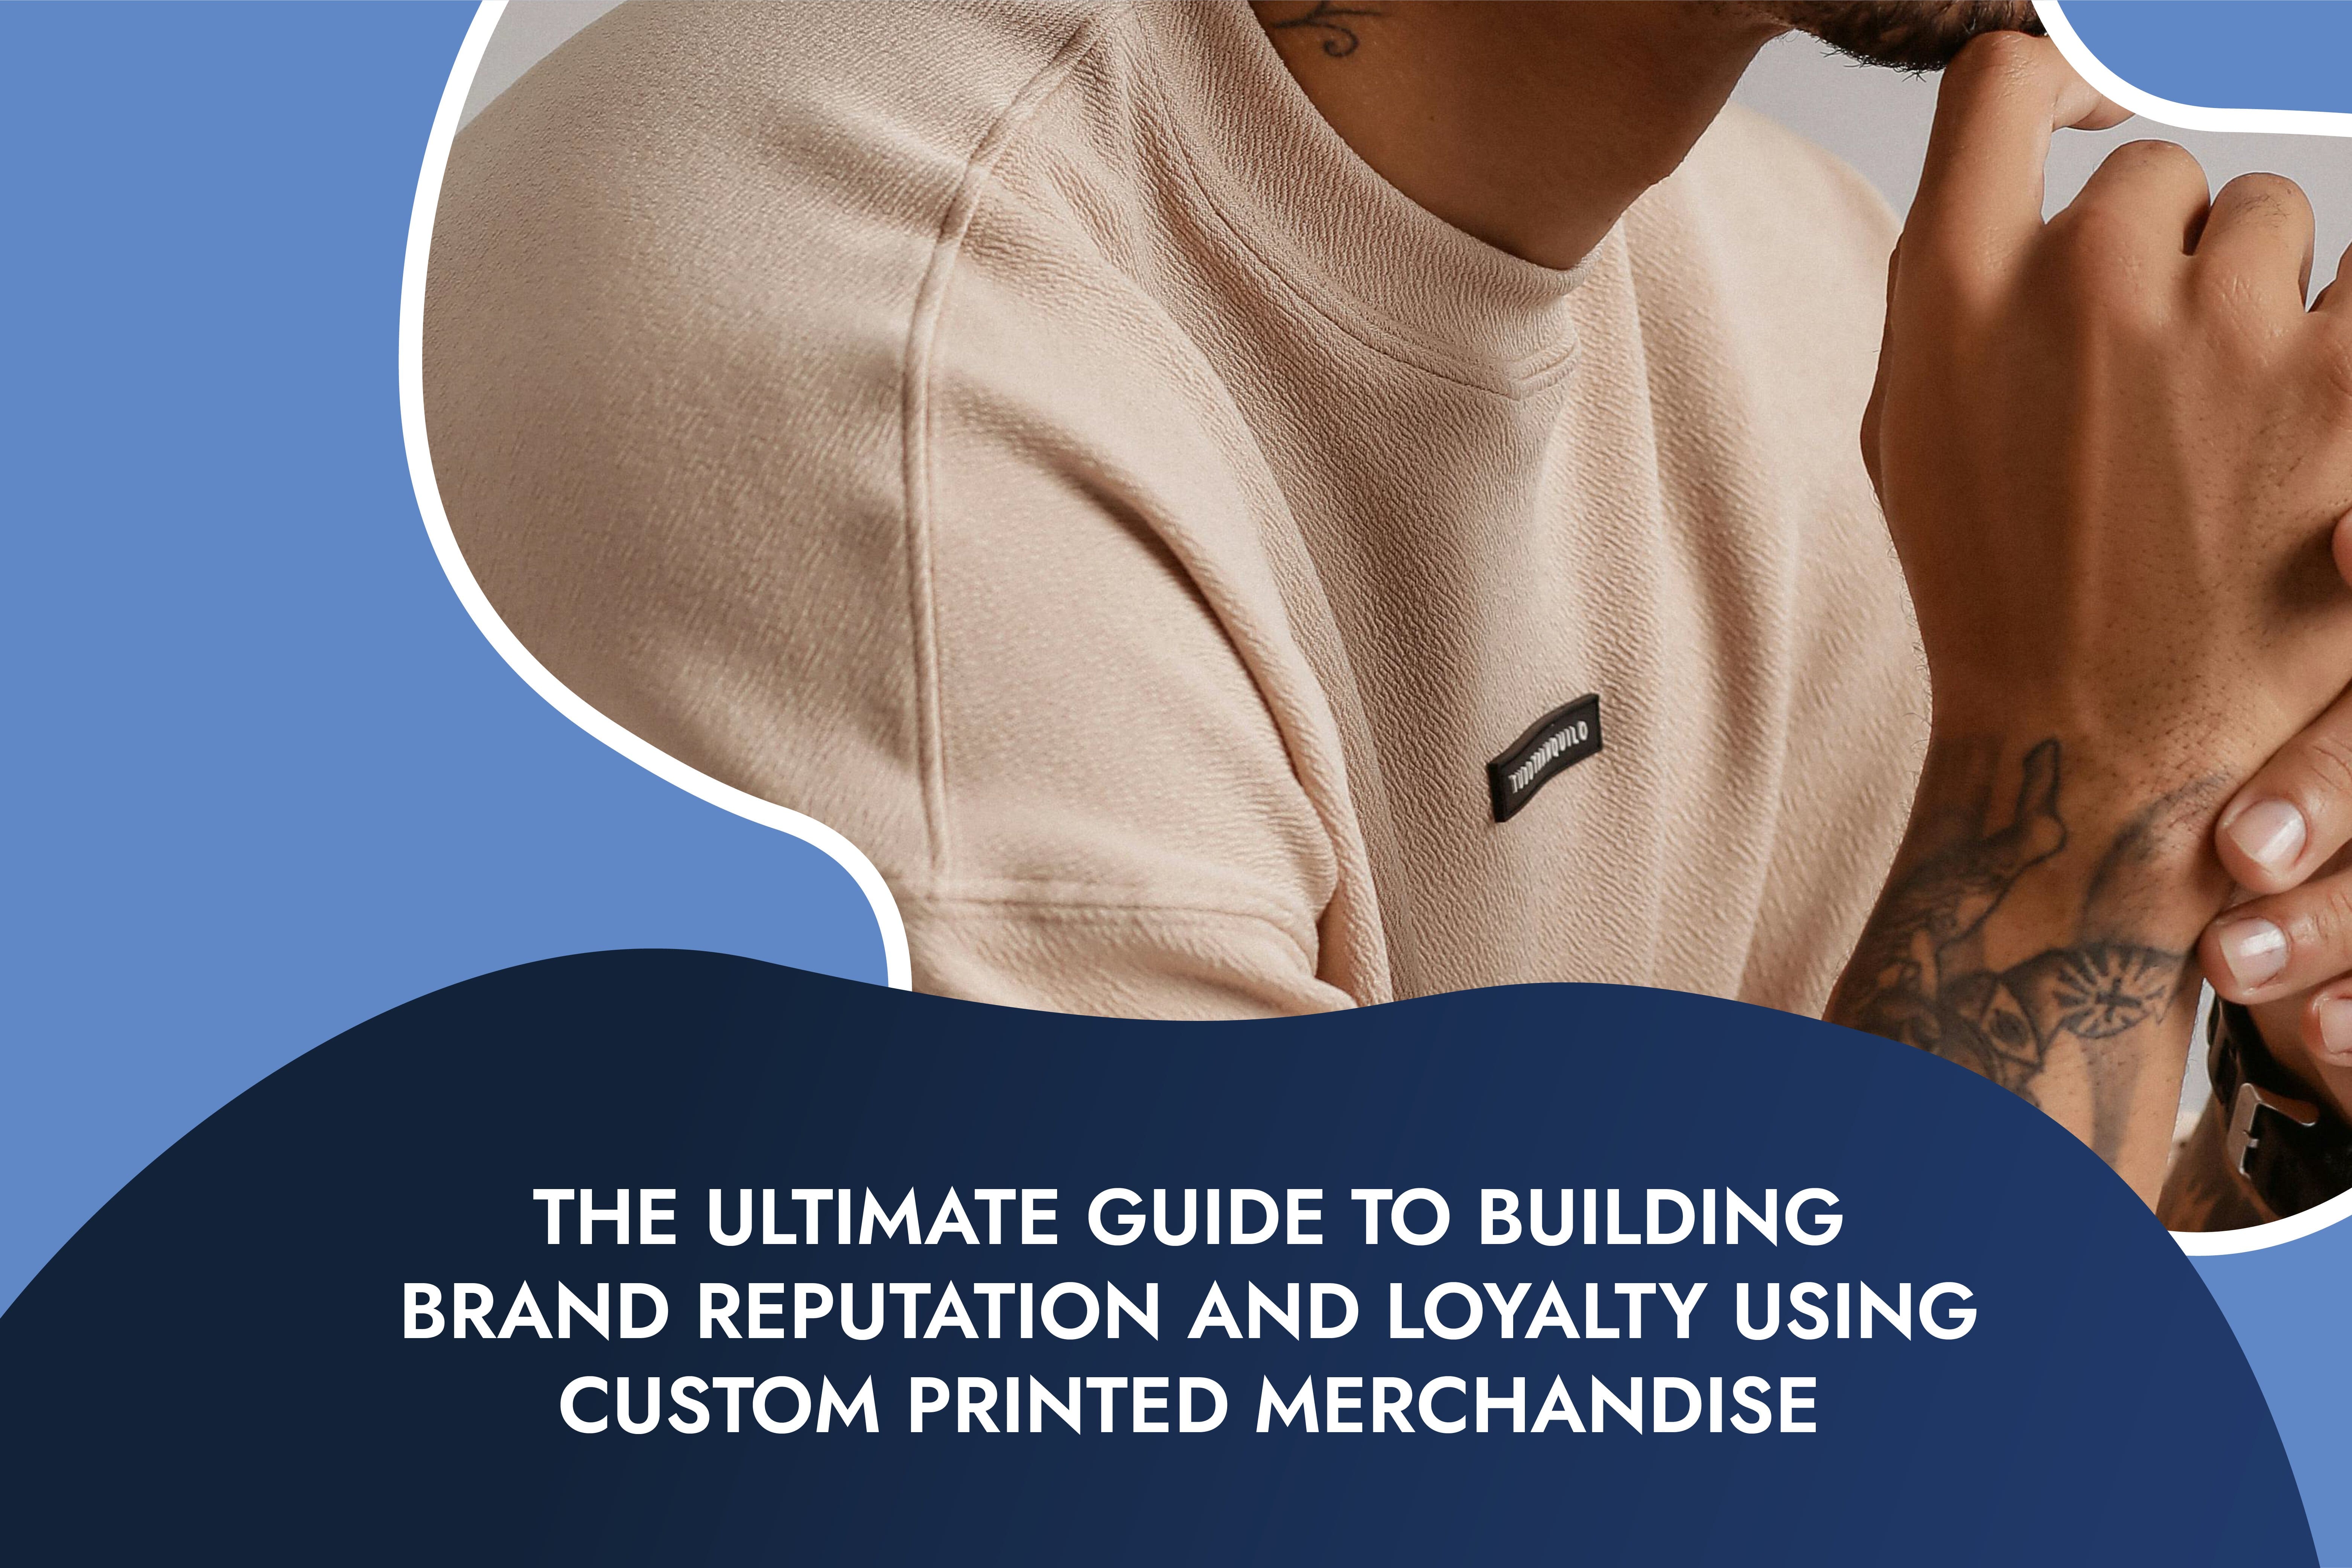 The Ultimate Guide to Building Brand Reputation and Loyalty Using Custom Printed Merchandise